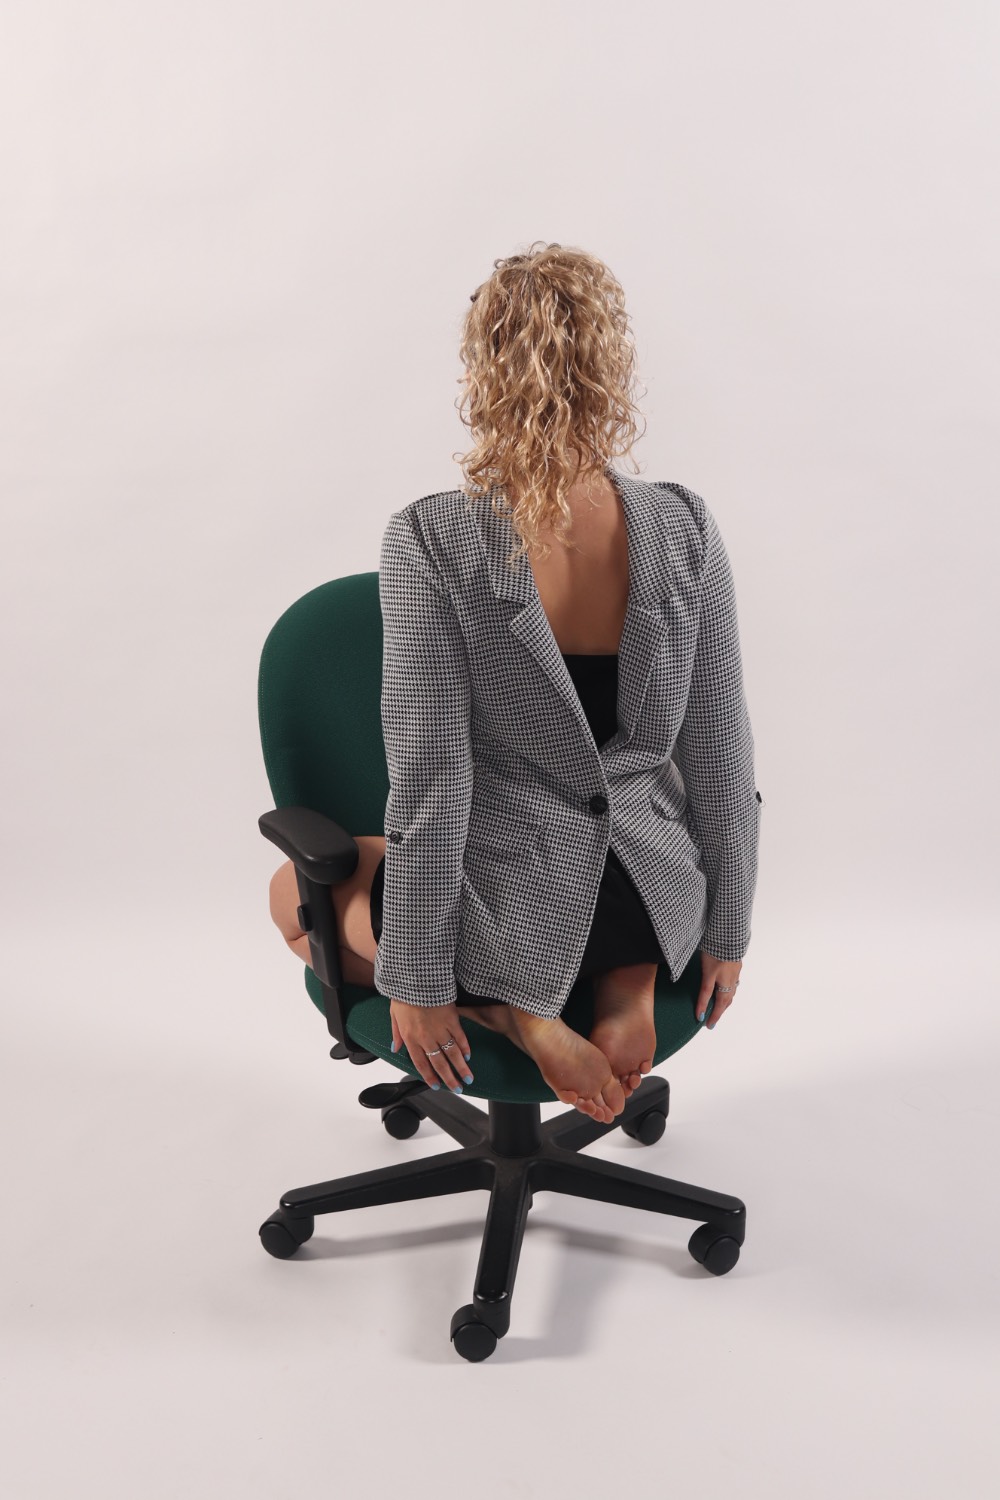 A woman kneeling backwards in an office chair on a white background. Her clothes are on backward too.